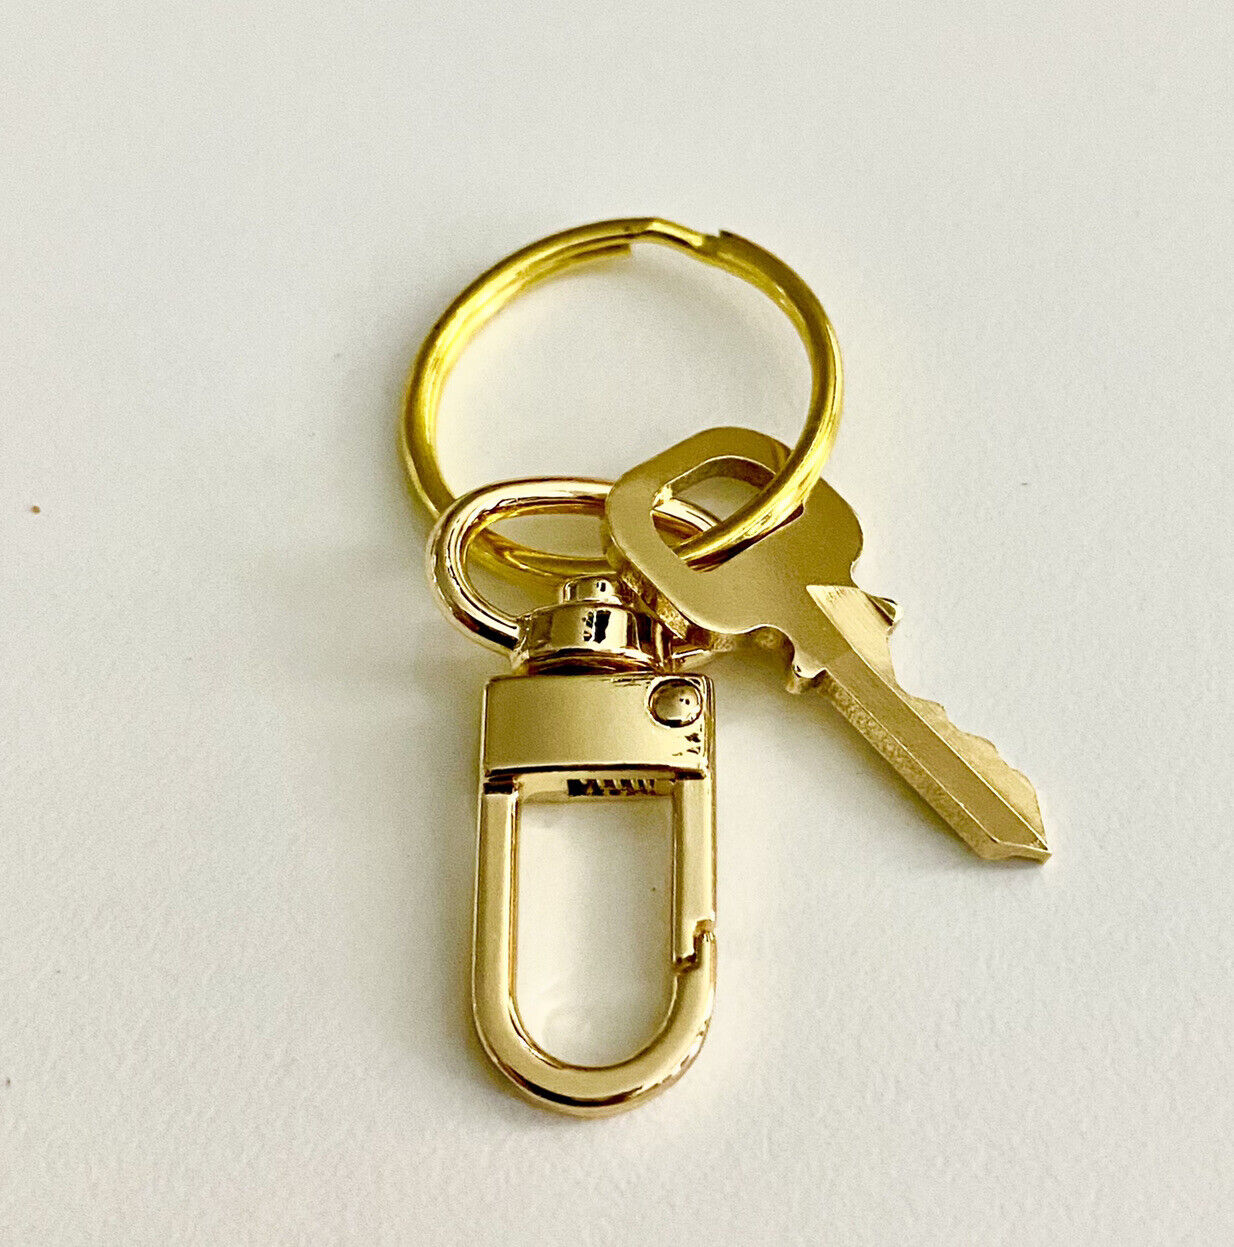 Louis Vuitton Key 317 Brass Goldtone Polished for Genuine LV # 317 Lock only